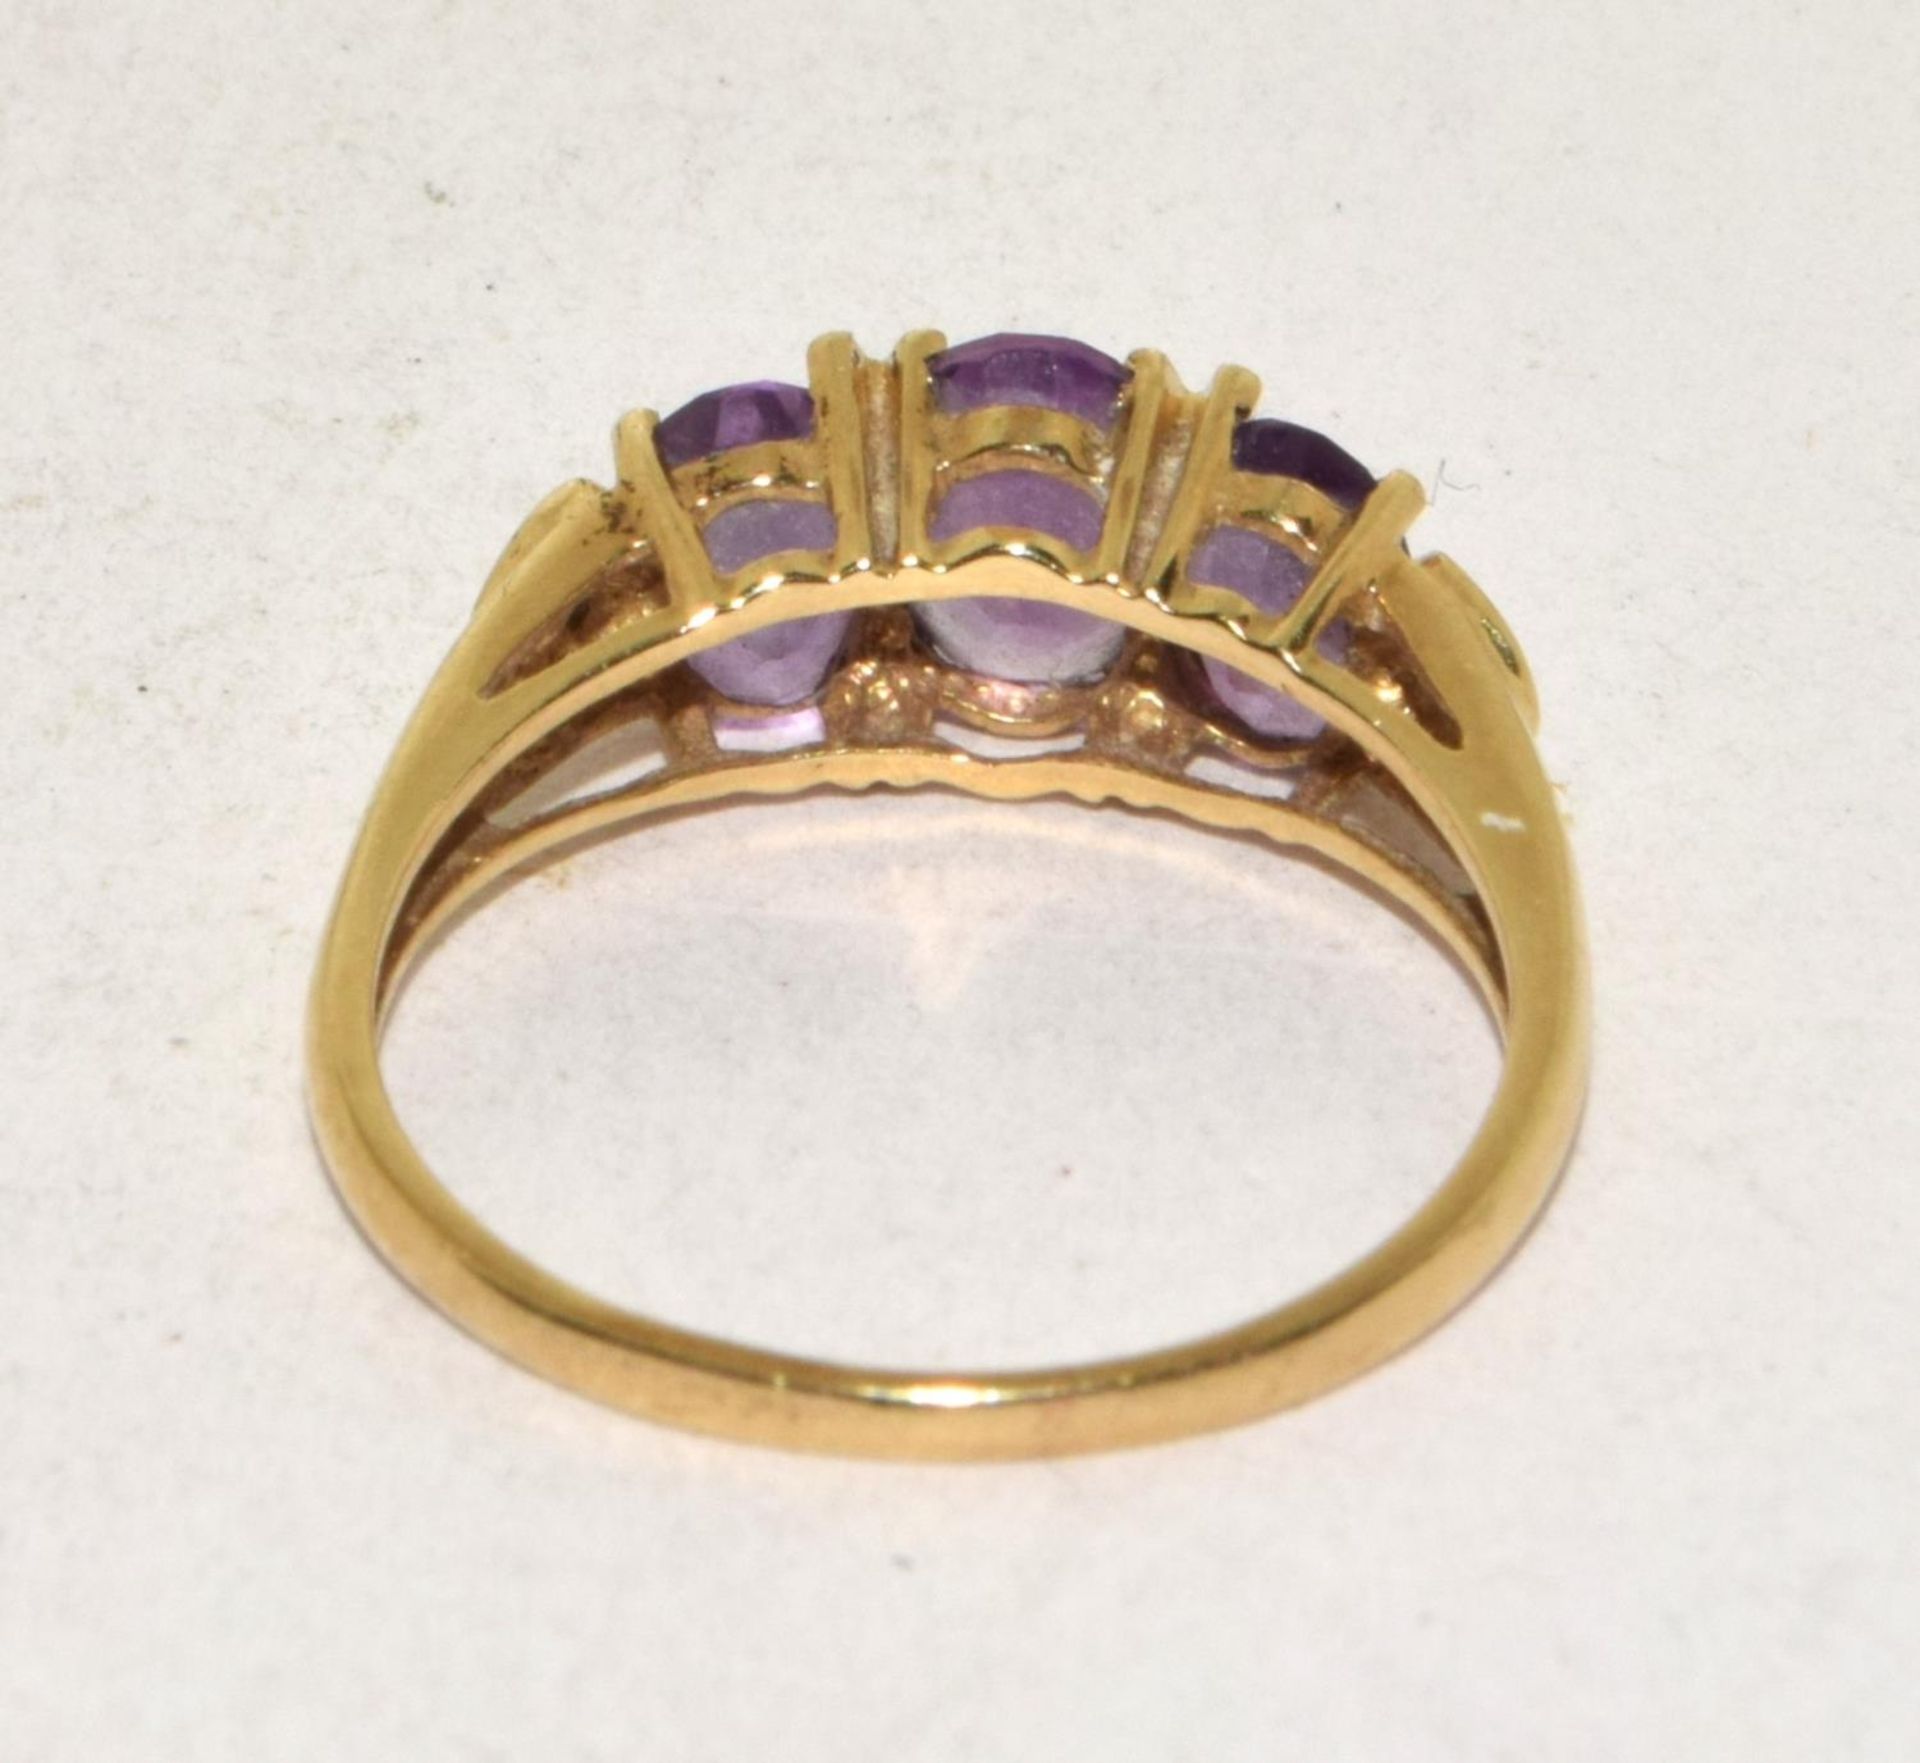 9ct gold ladies Diamond and Amethyst ring hallmarked as Diamond in the ring 2.2g size O - Image 3 of 5